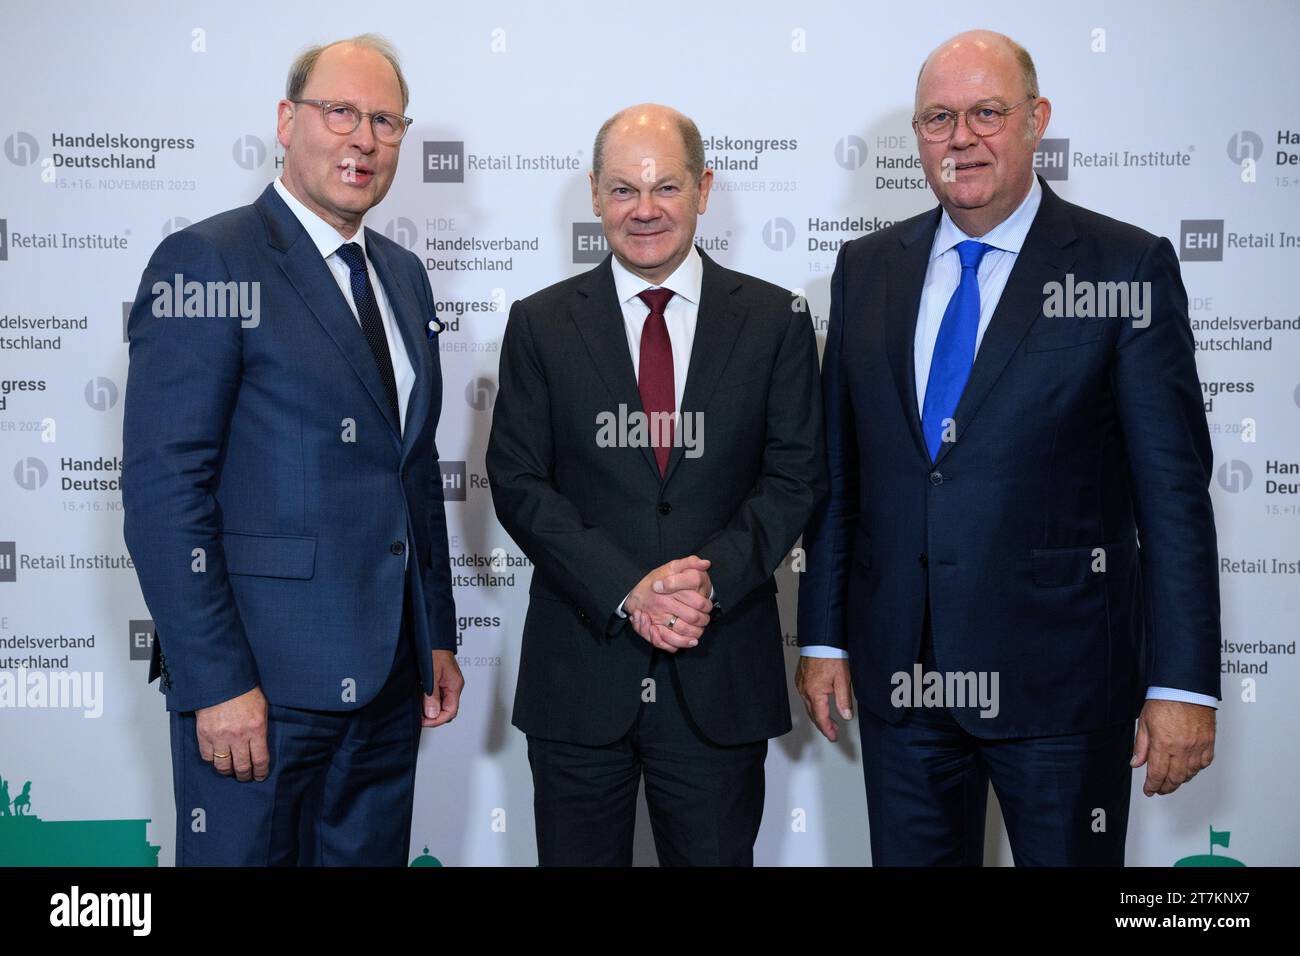 Berlin, Germany. 16th Nov, 2023. Federal Chancellor Olaf Scholz (M, SPD) is welcomed by Stefan Genth (l), Managing Director of the German Retail Association (HDE), and Alexander v. Preen (r), President of the HDE, at the German Retail Congress organized by the German Retail Association (HDE). The German Retail Congress is the meeting place for the German retail trade. Credit: Bernd von Jutrczenka/dpa/Alamy Live News Stock Photo